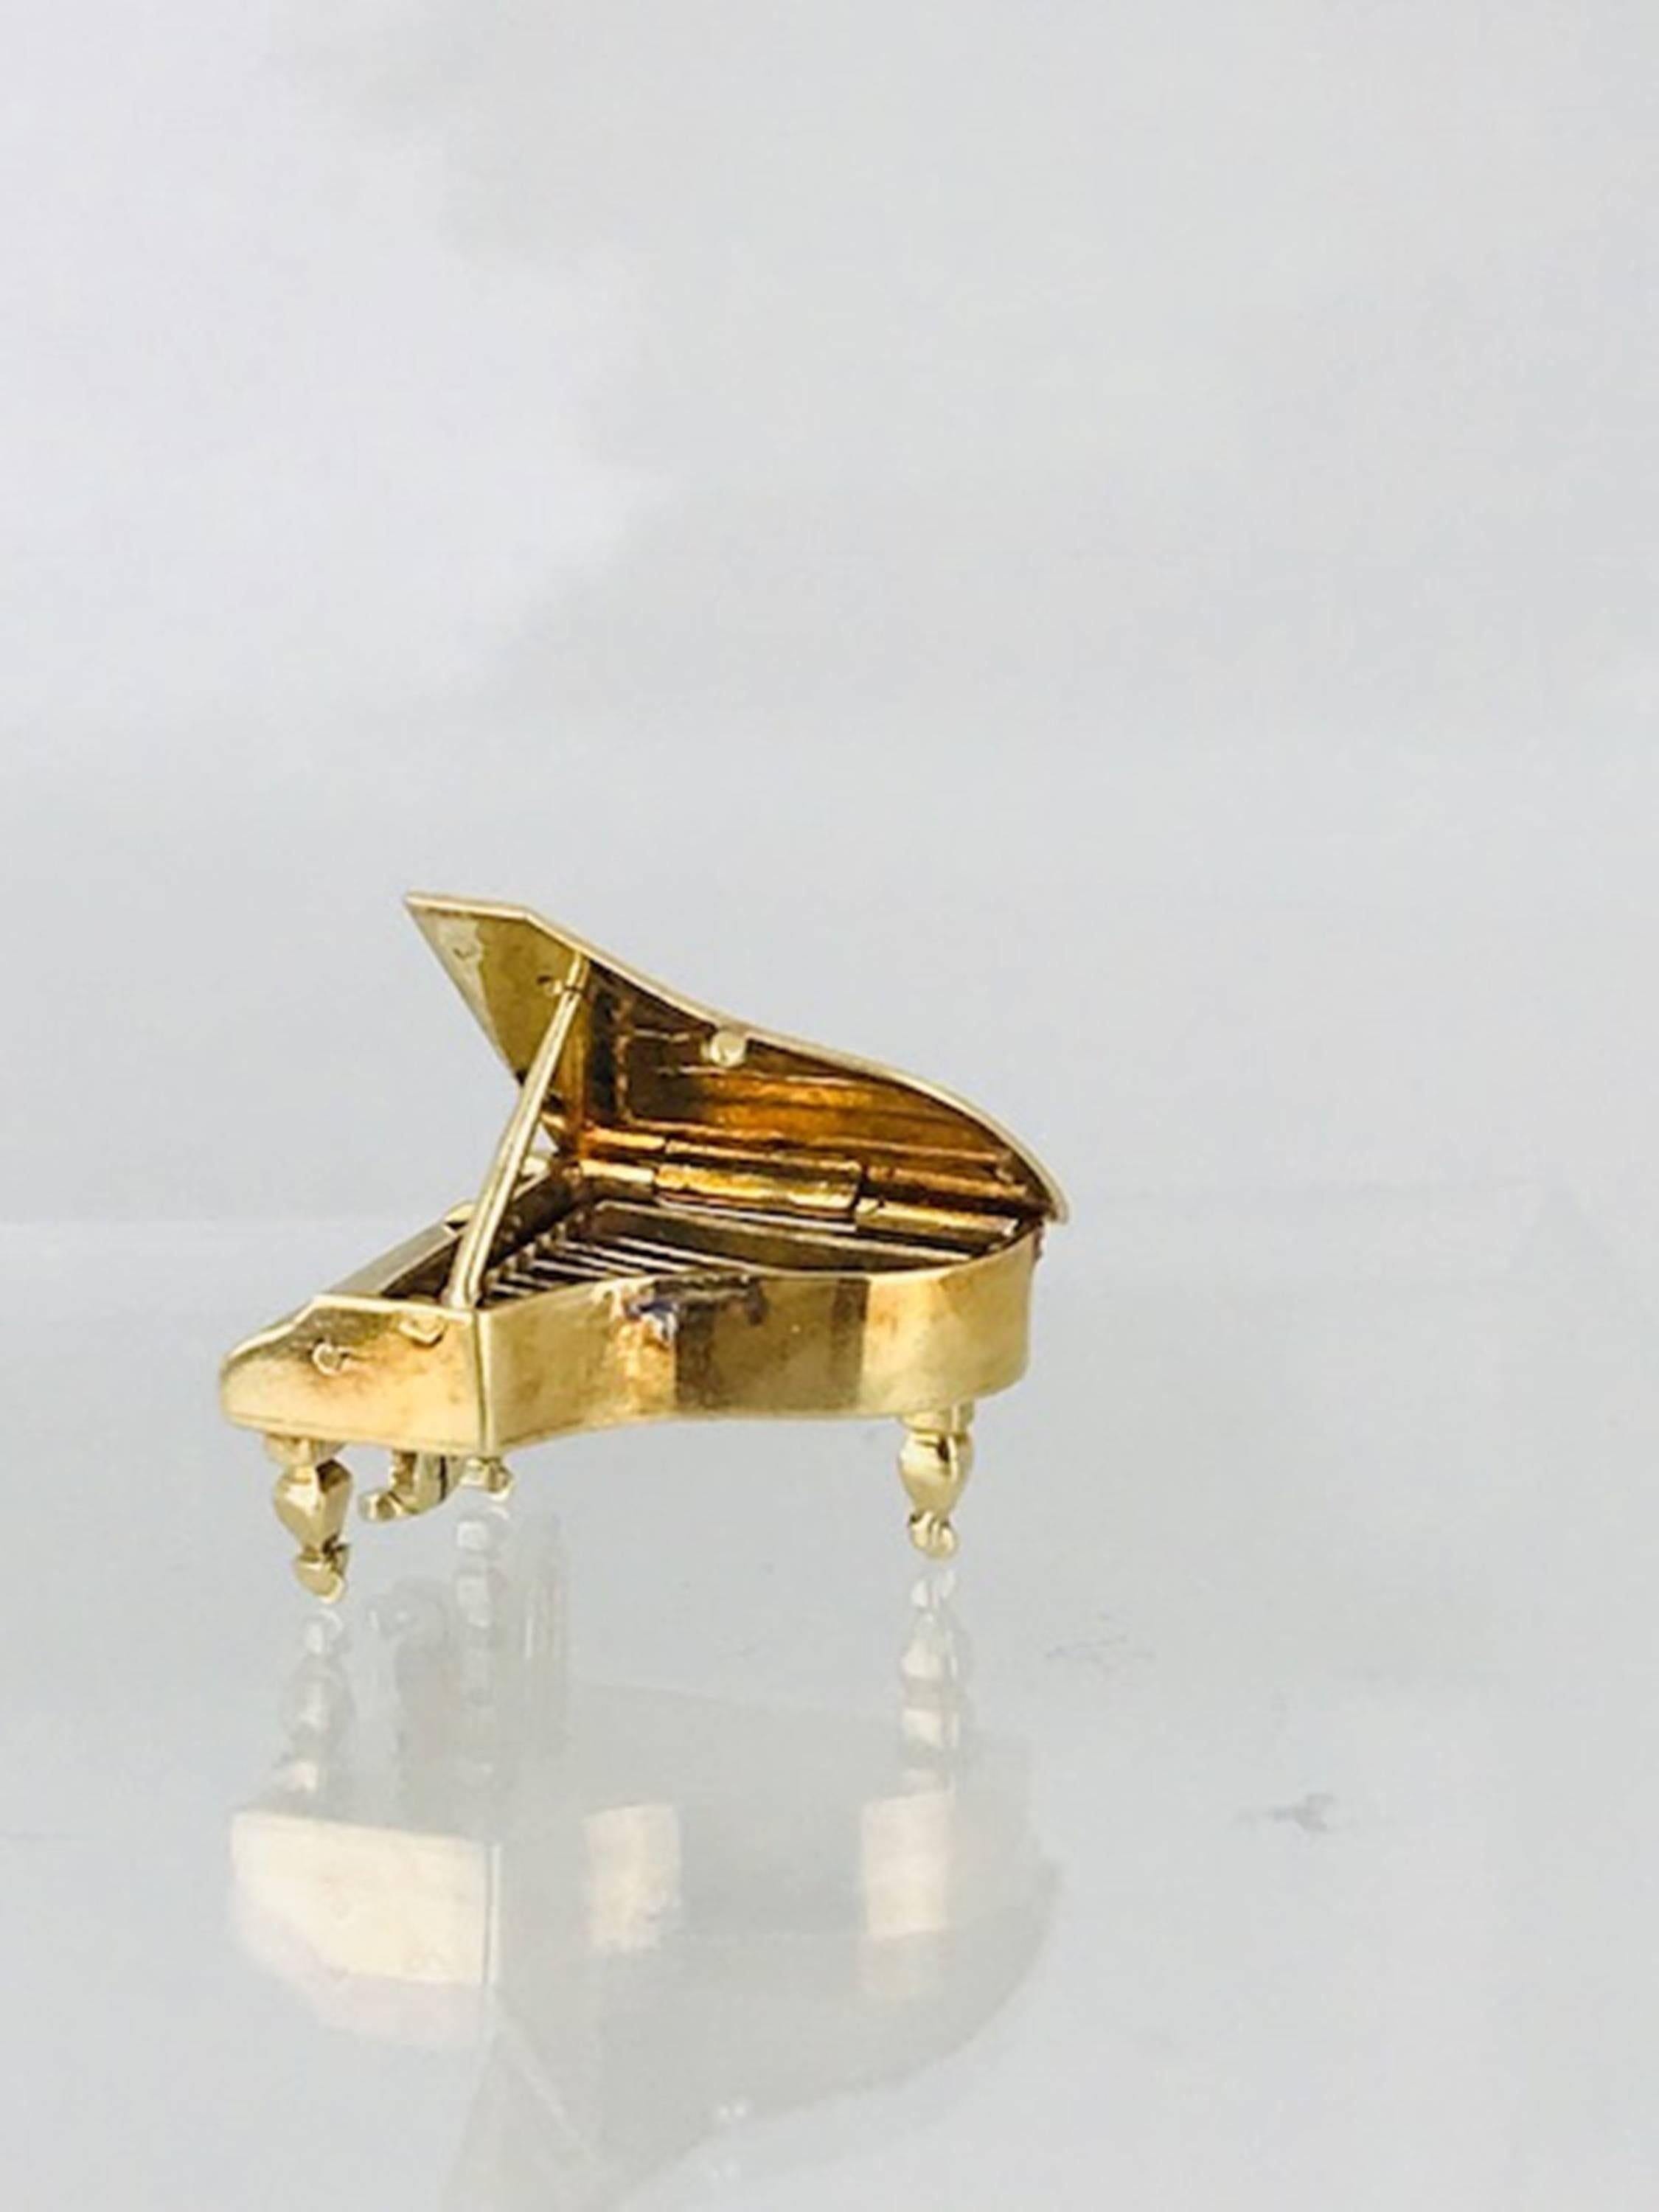 Modern Grand Piano, Charm Handmade Movable Parts of Yellow and White Gold, circa 1950 For Sale